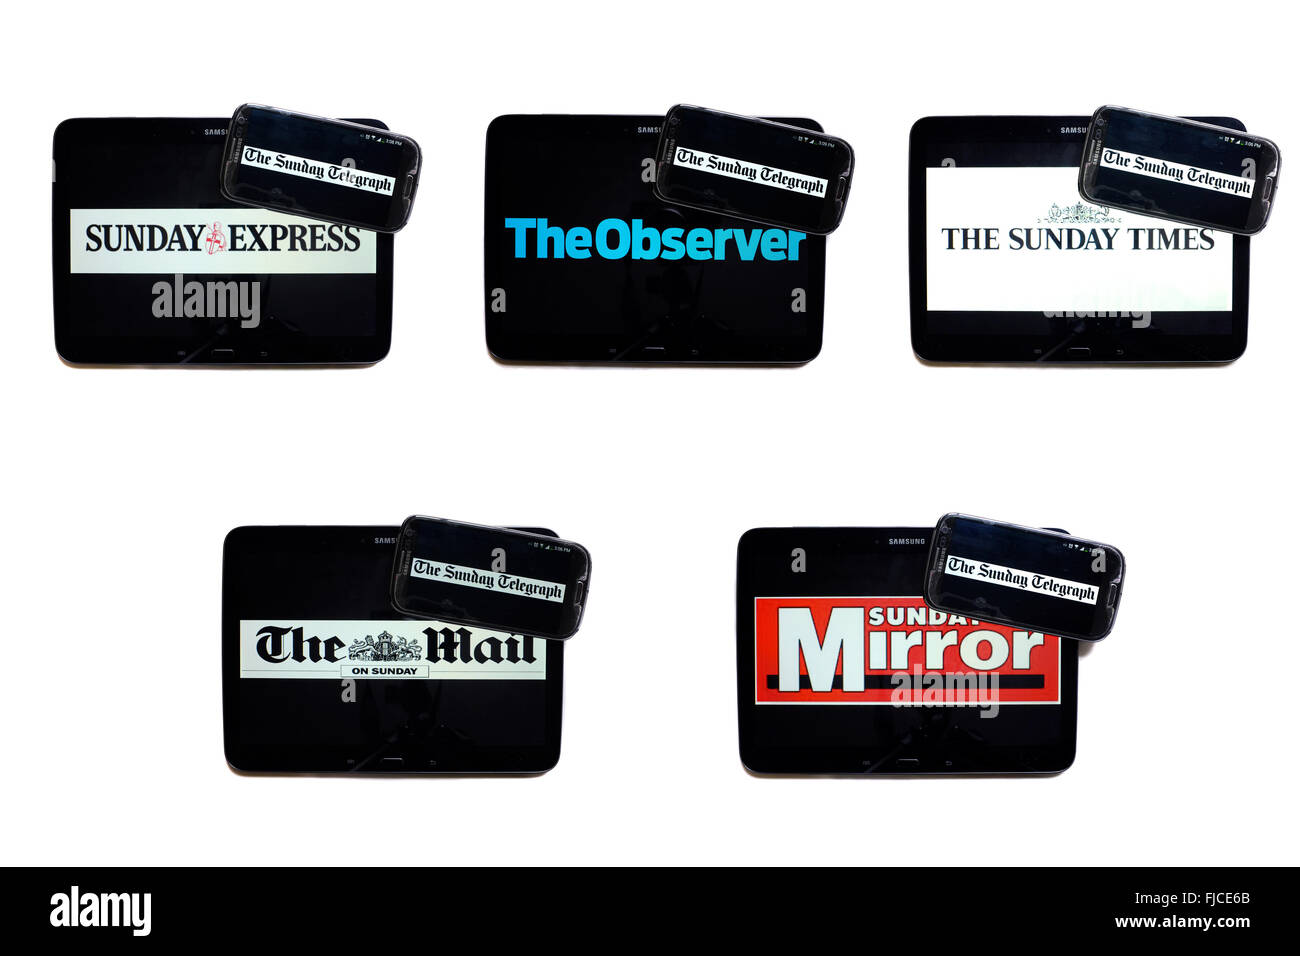 The Sunday Telegraph newspaper logo on smartphone screens surrounded by tablets displaying the logos of rival newspapers. Stock Photo